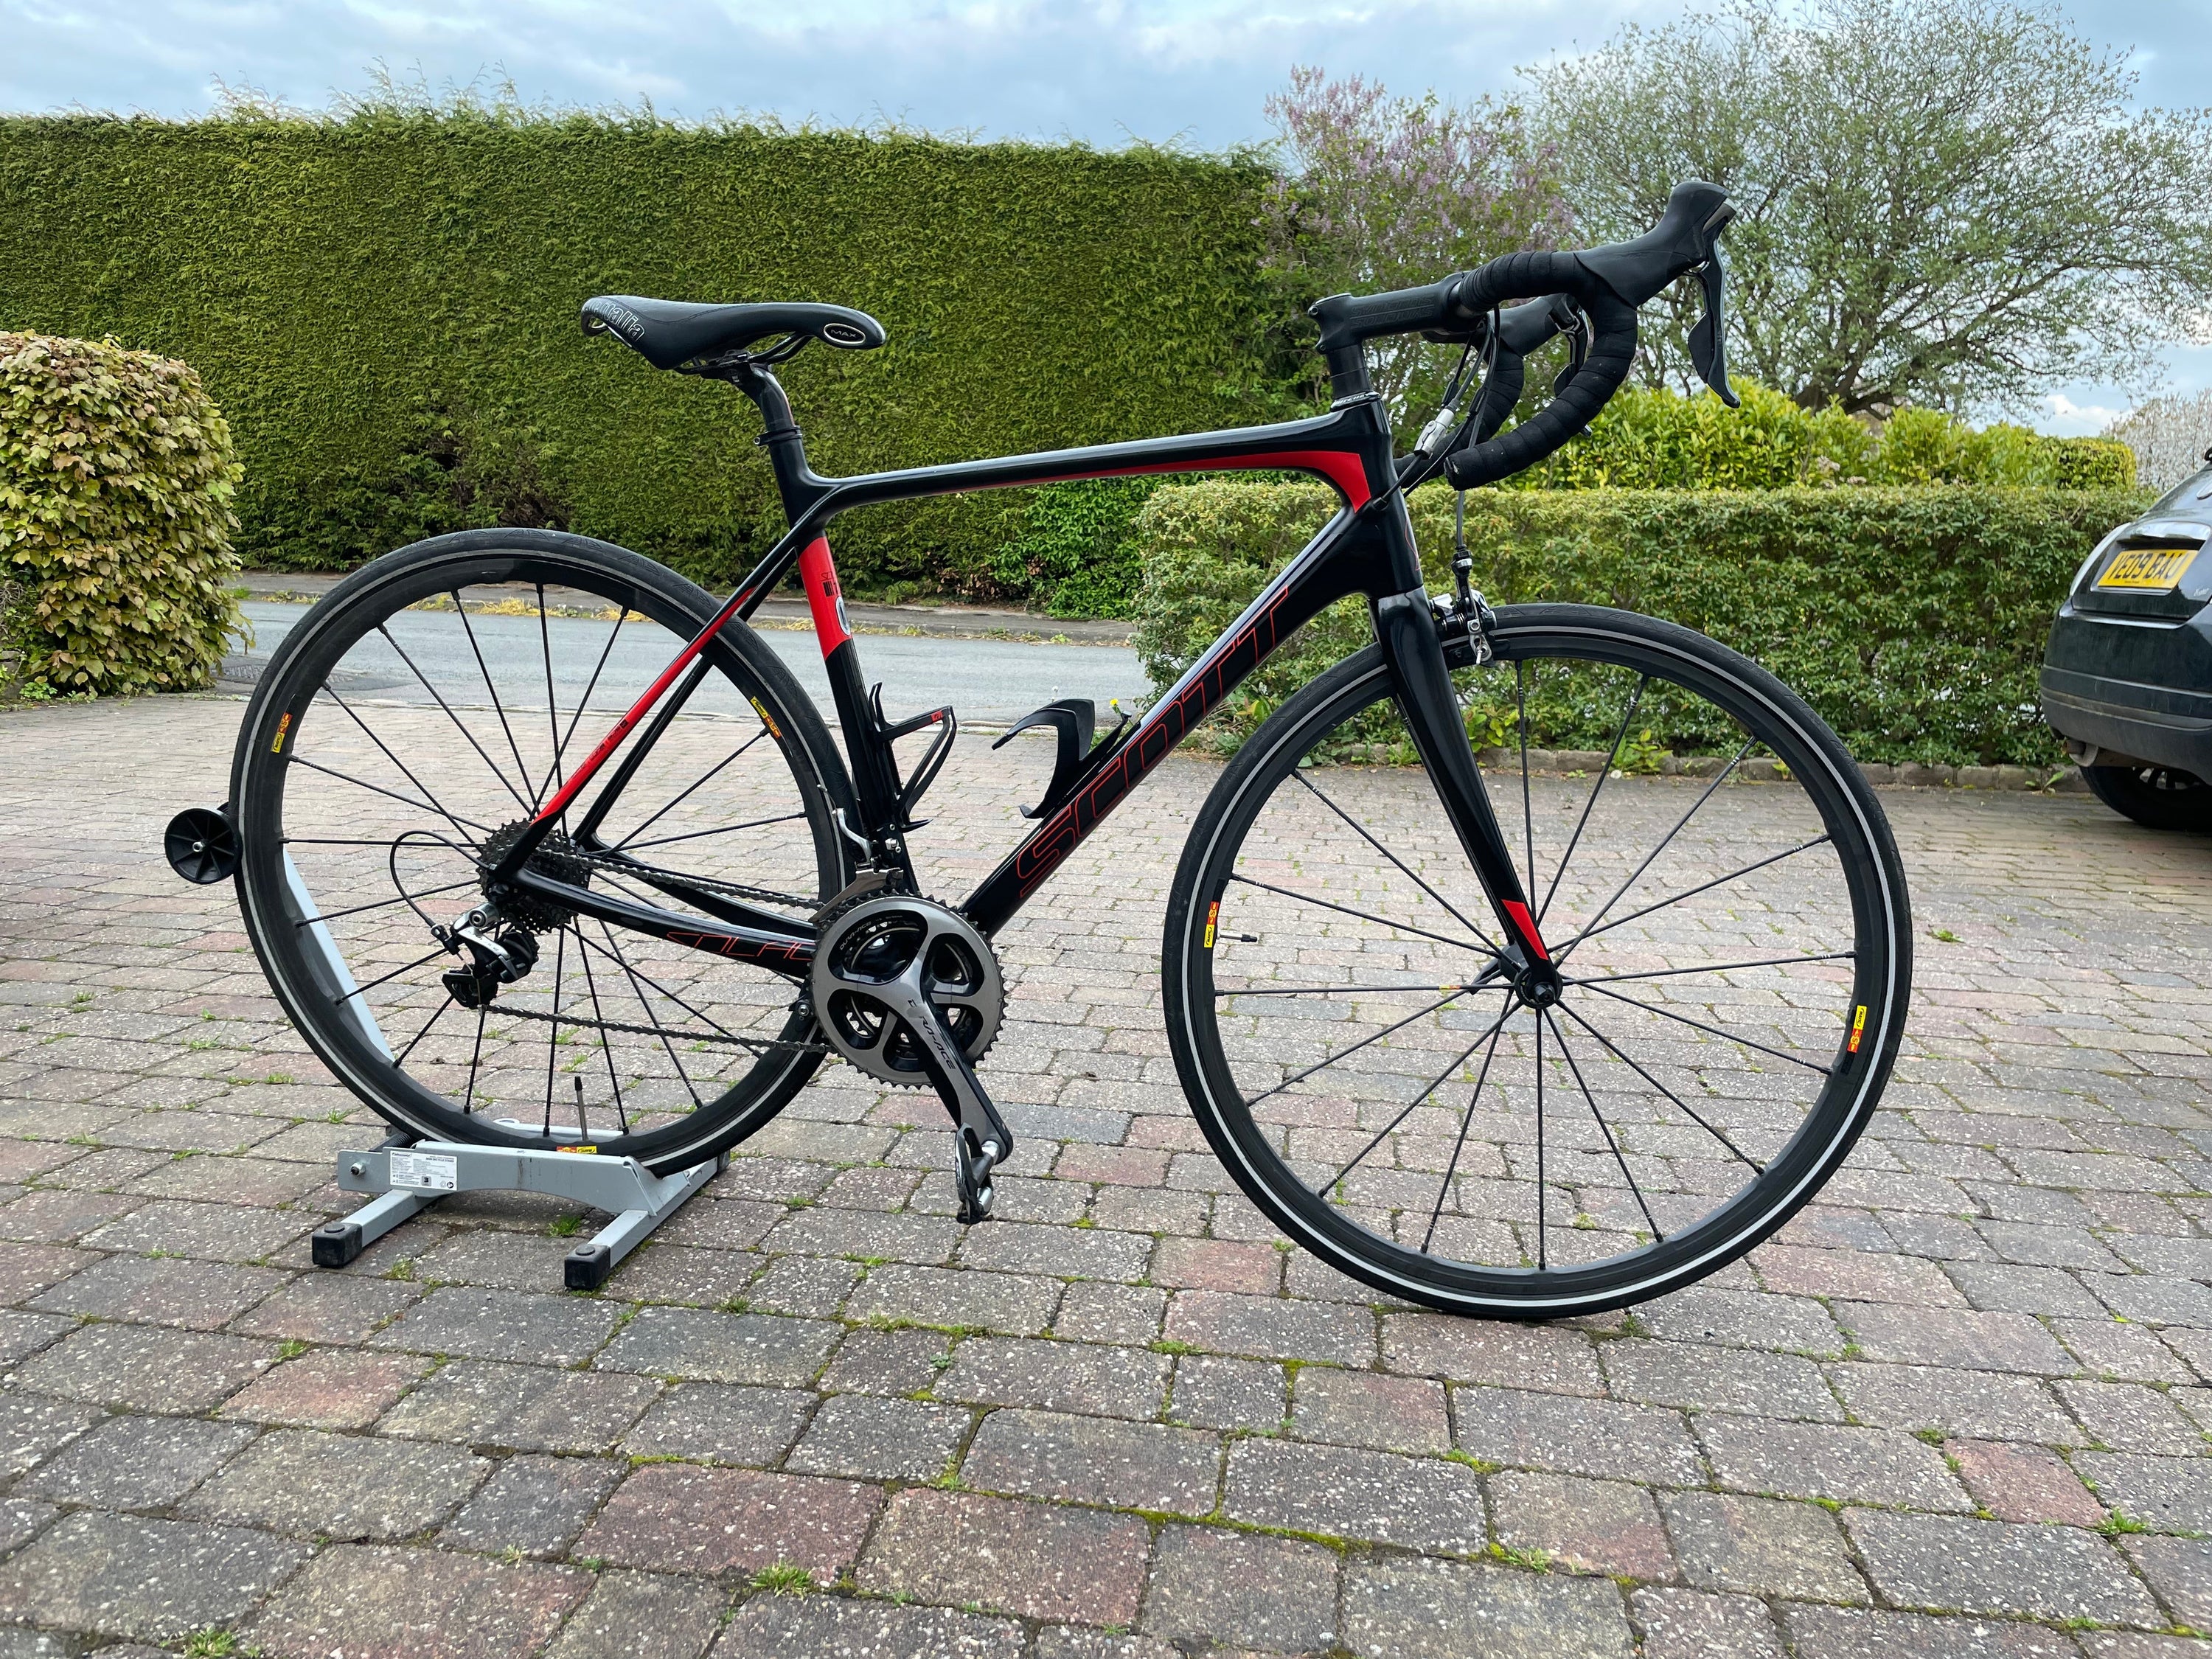 <span style="background-color:rgb(246,247,248);color:rgb(28,30,33);"> Scott Solace 10 2015 Road bike </span>